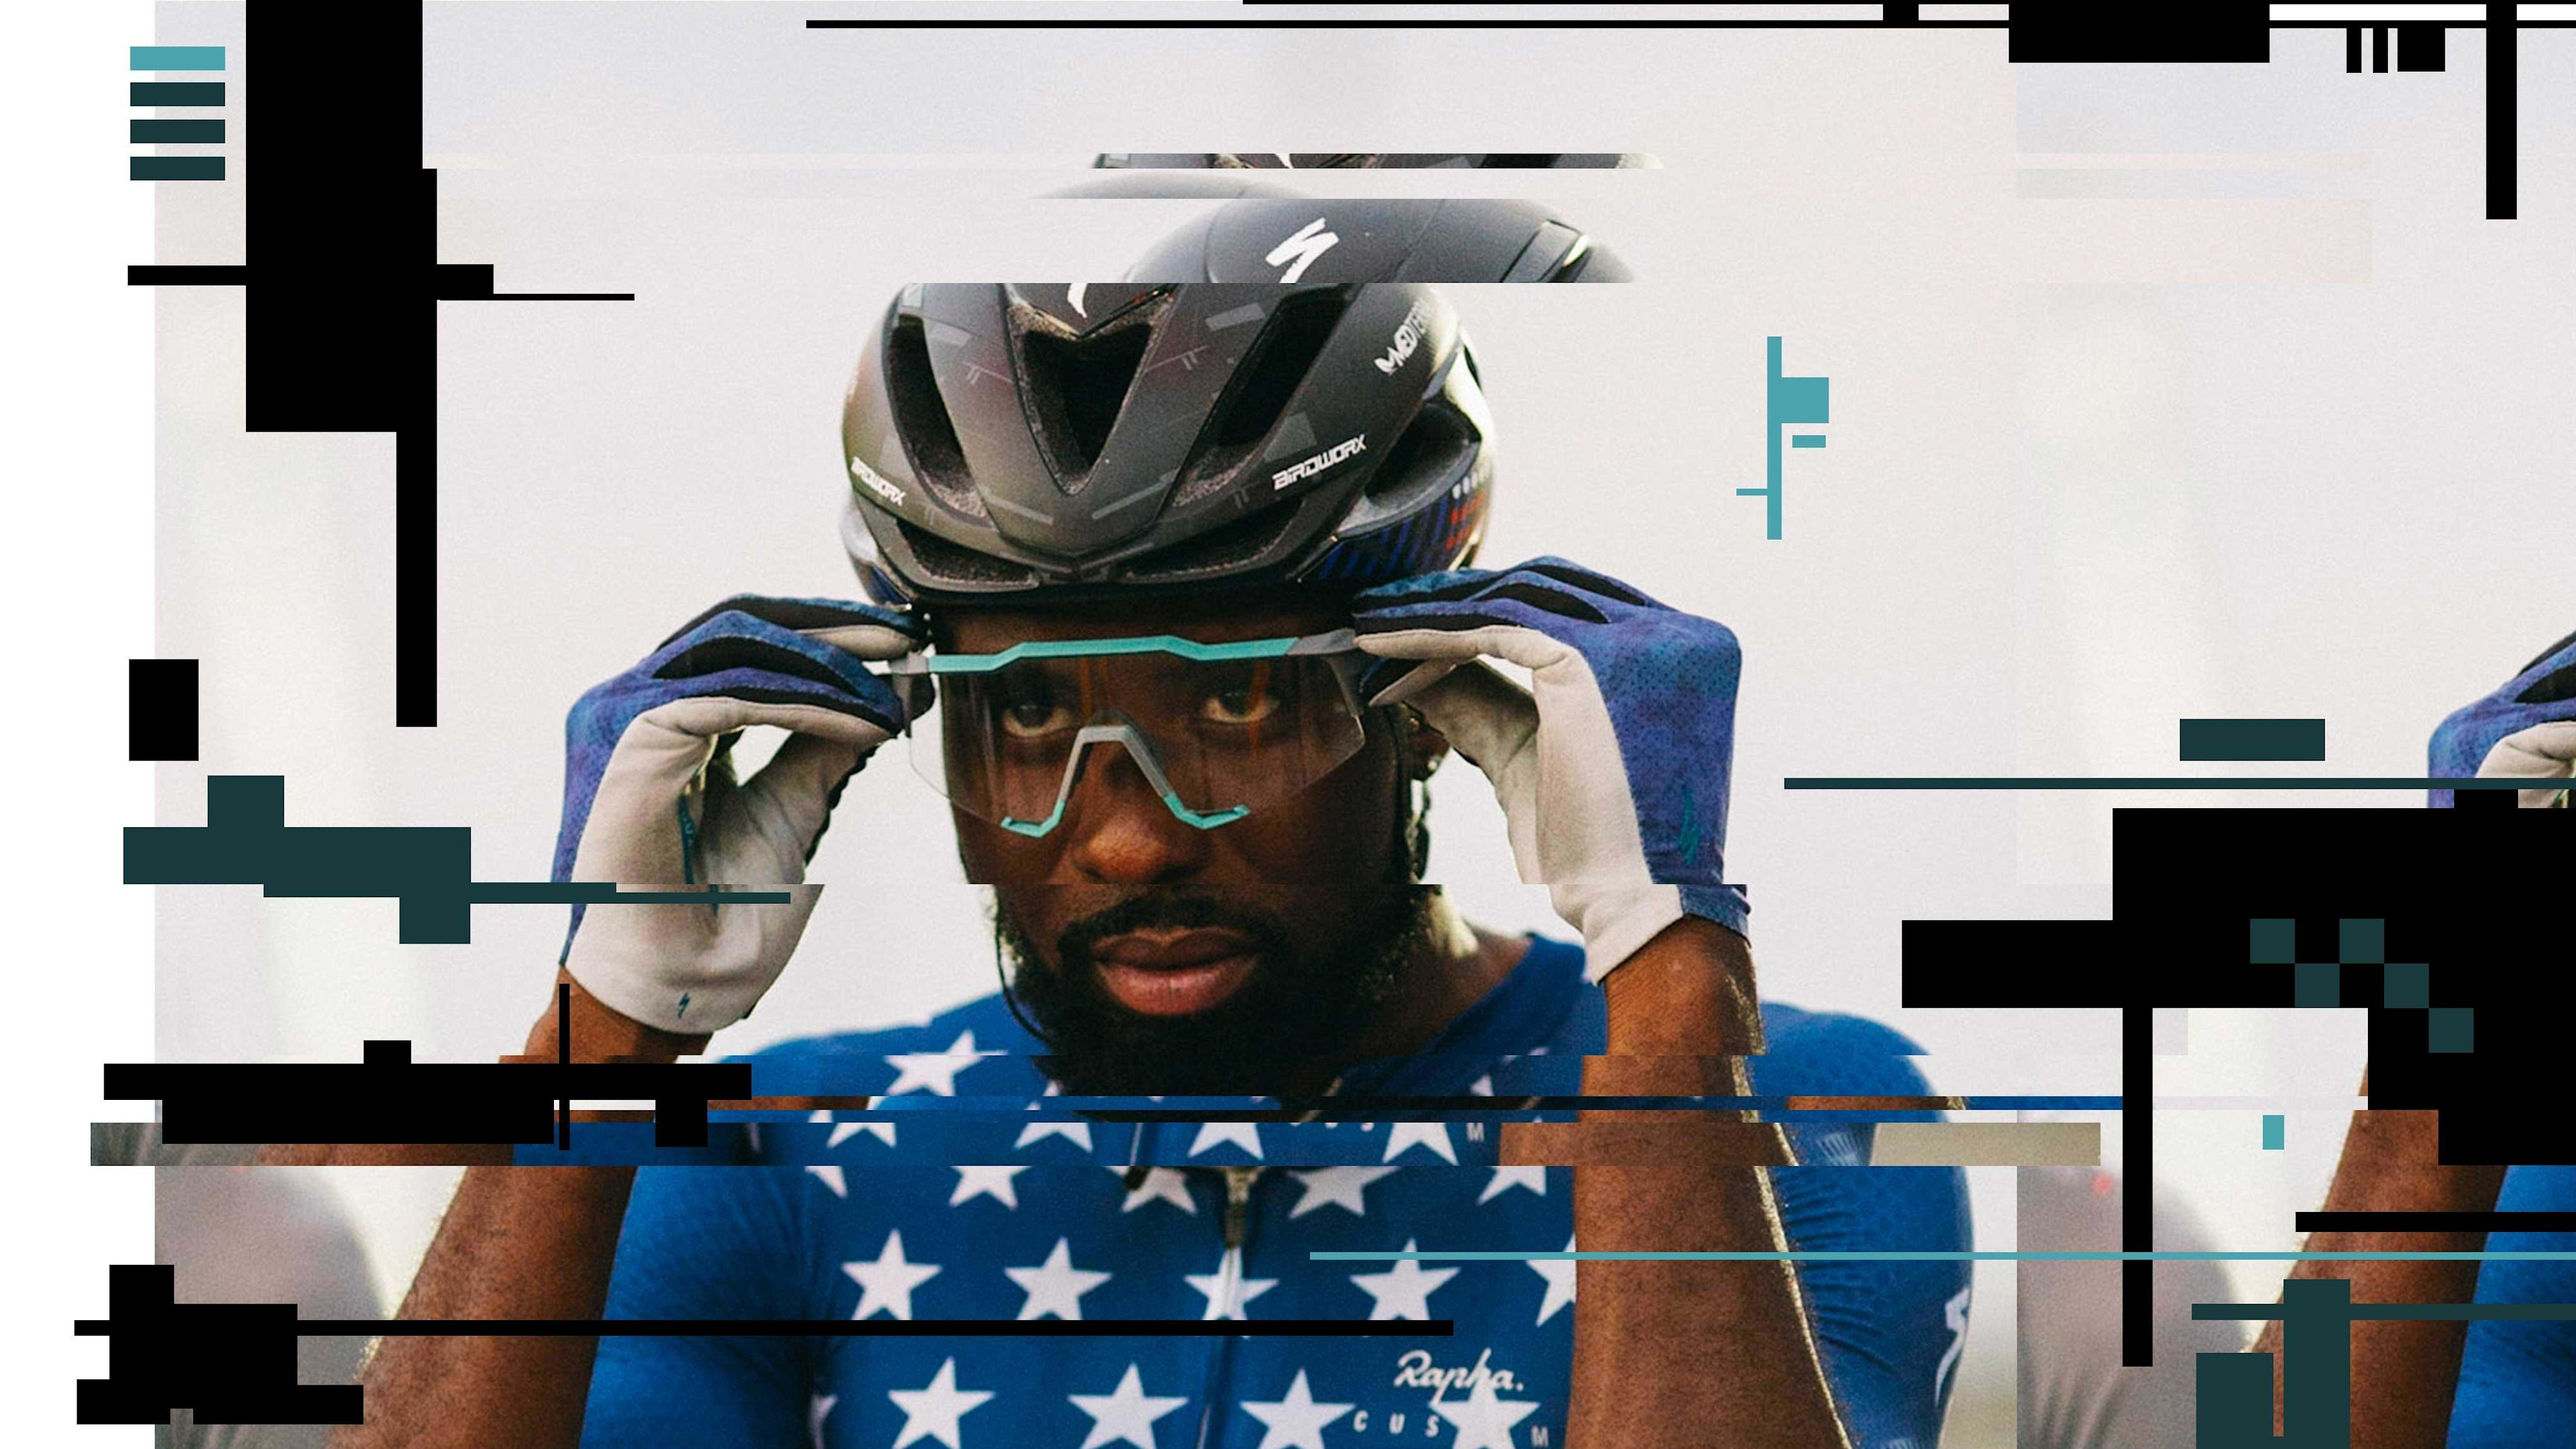 Justin Williams Wants You to Care About Pro Cycling